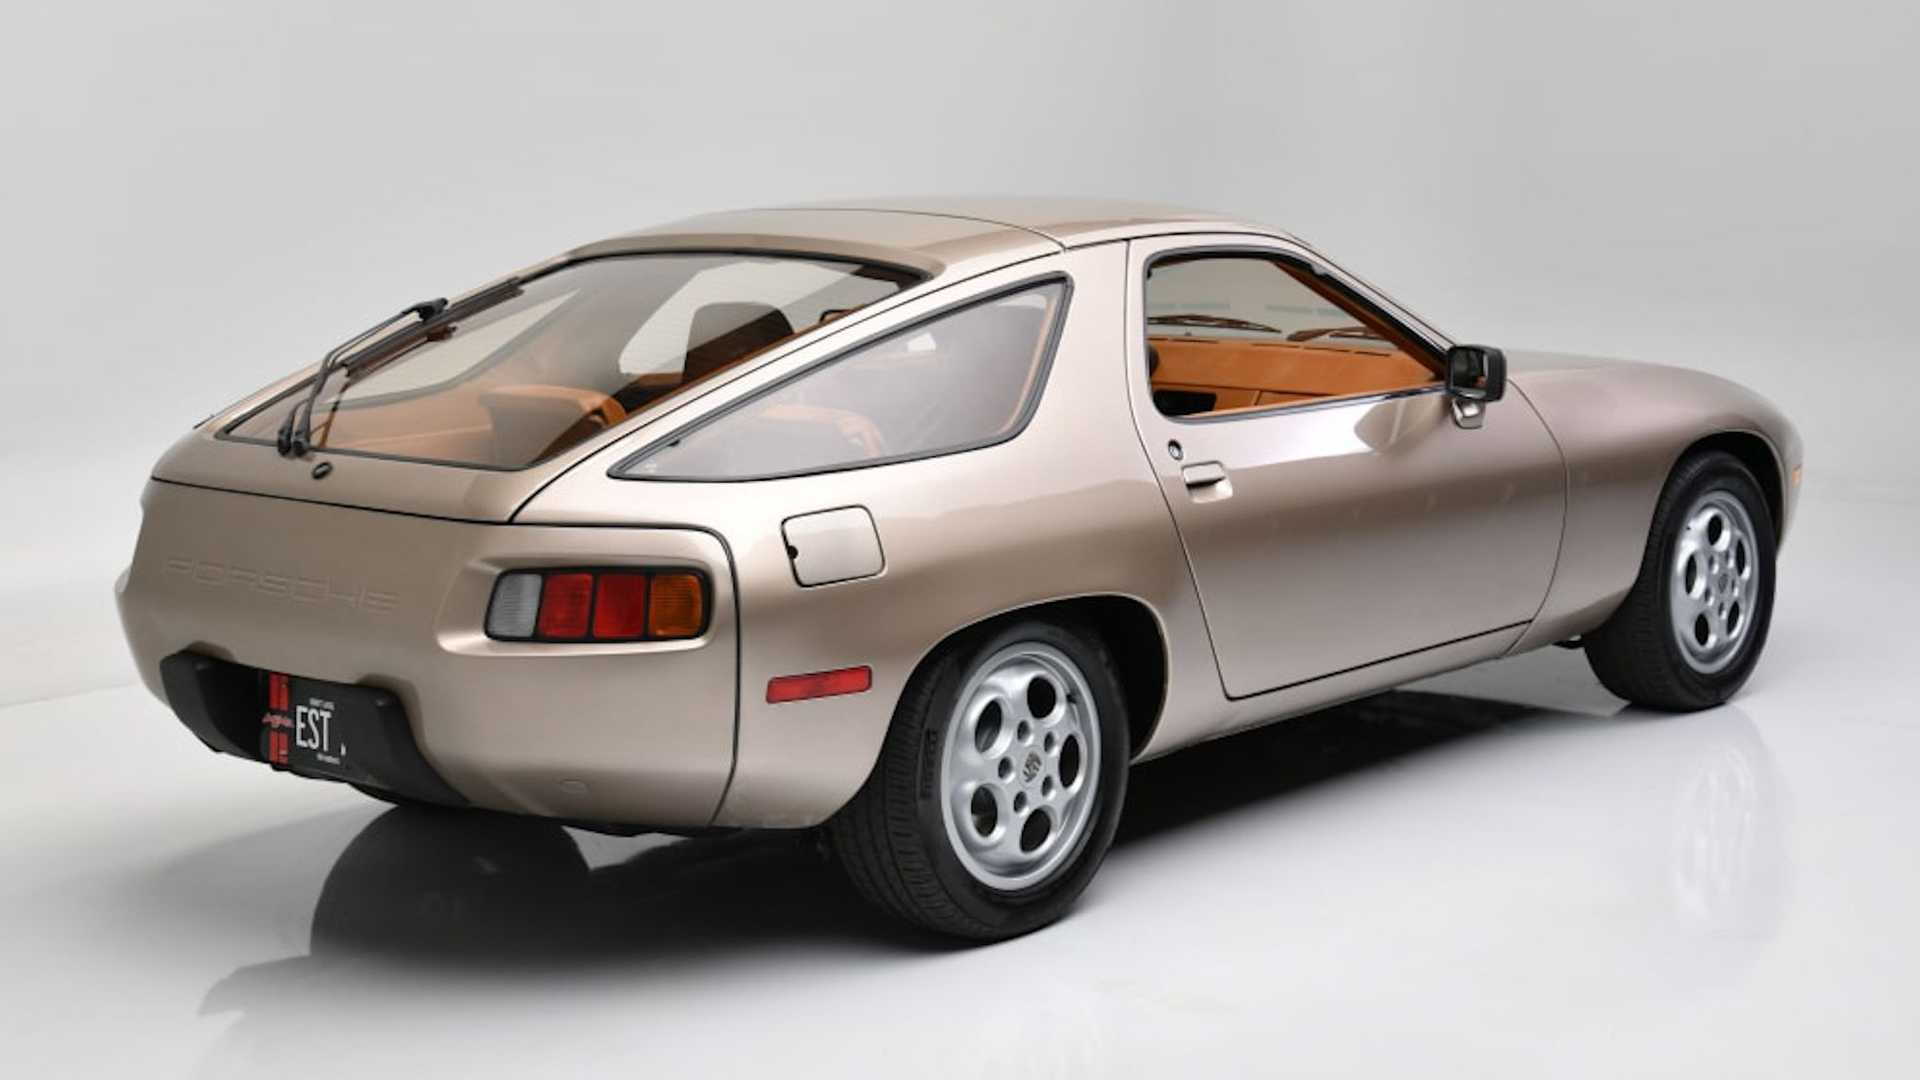 1979 Porsche 928 used during filming of “Risky Business” - Photo credit: Barrett-Jackson